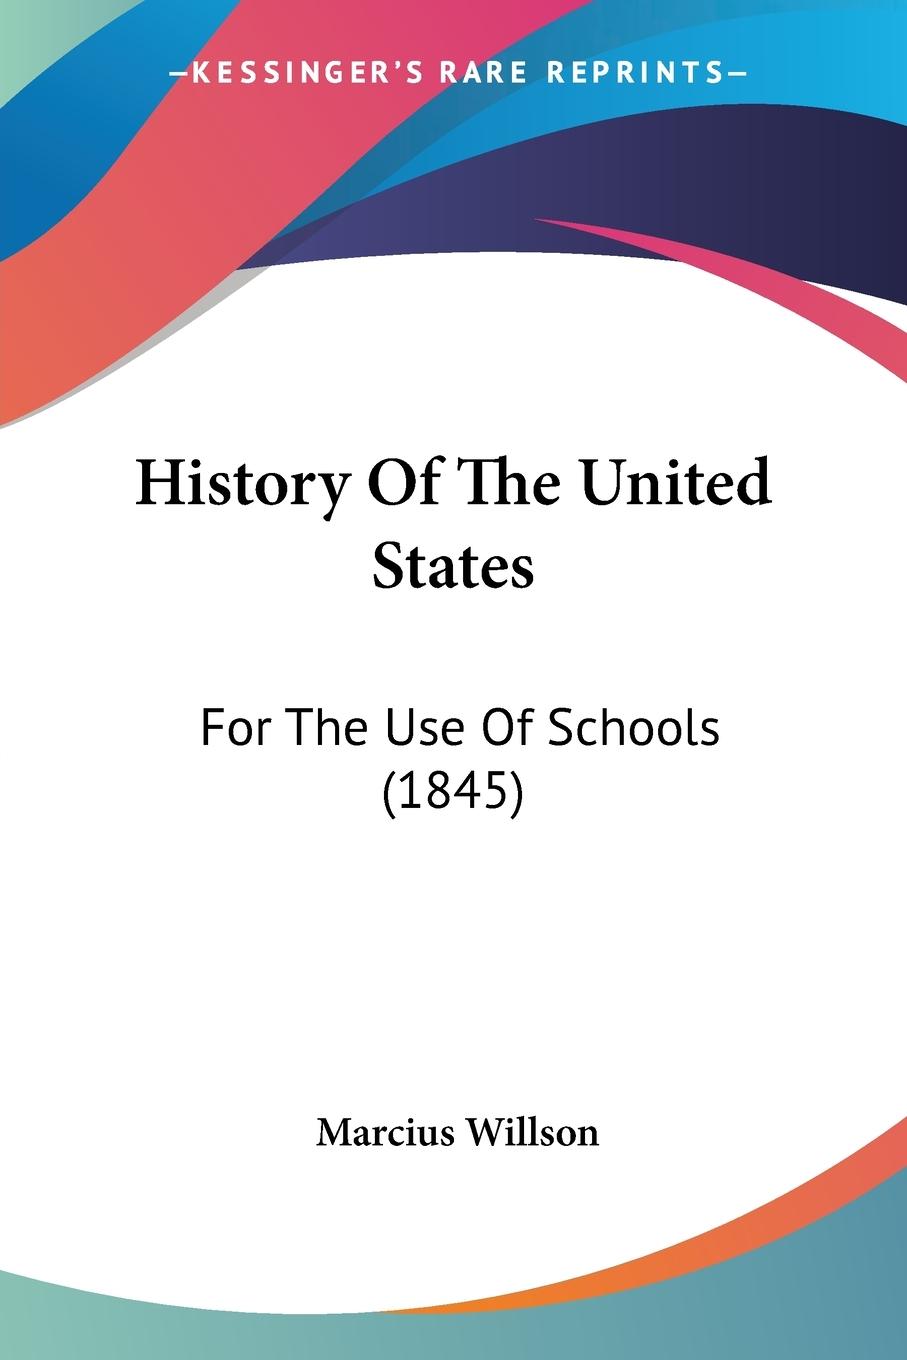 History Of The United States - Willson, Marcius